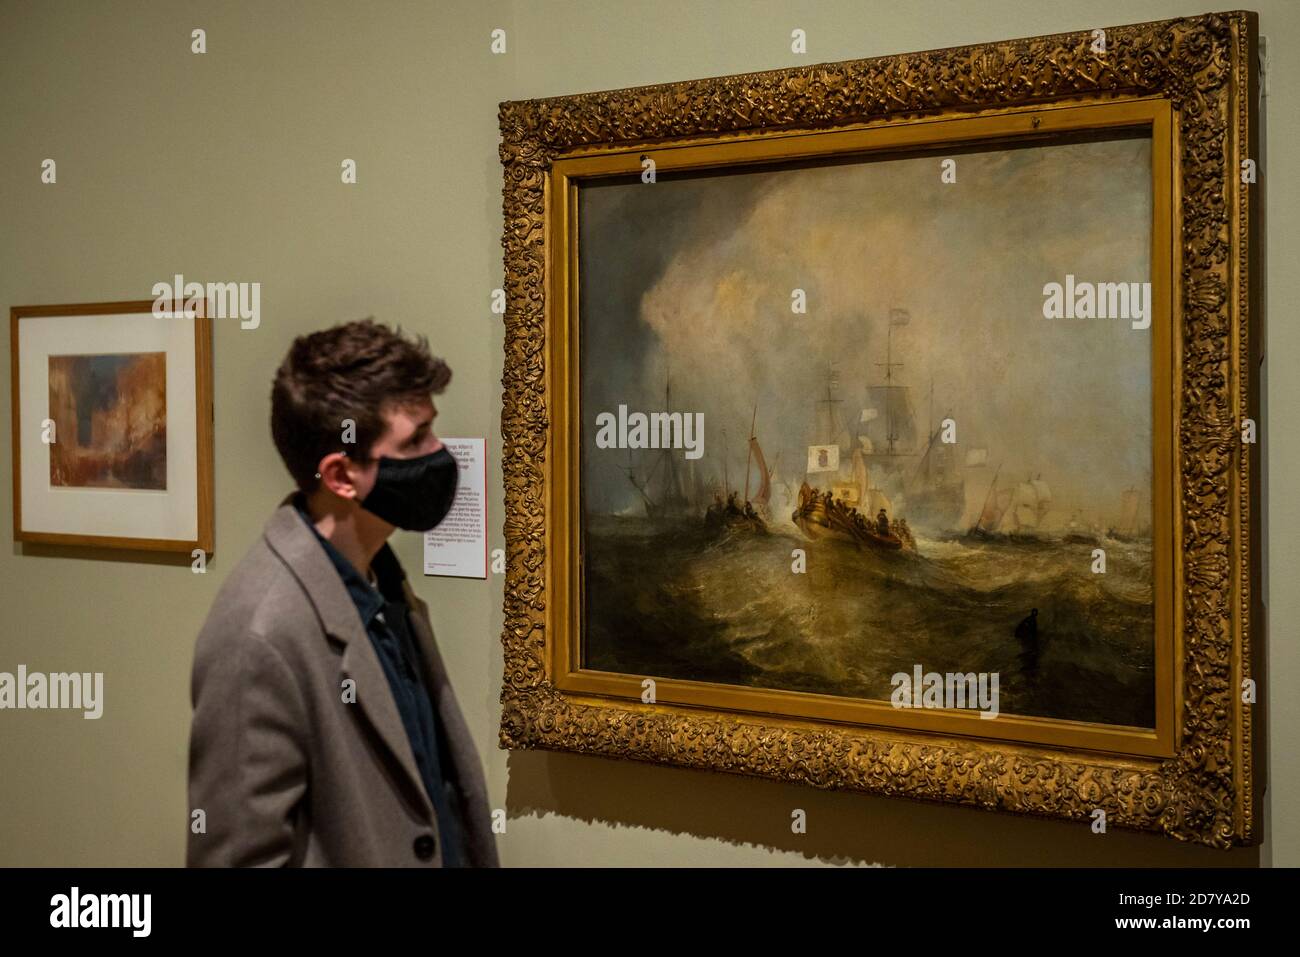 London, UK. 26th Oct, 2020. William of Orange Embarks - Turner's Modern World at Tate Britain. The new exhibition reveals how Britain's greatest landscape painter found new ways to capture the events of his day, from technology's impact on the natural world to the effects of modernisation on society. Credit: Guy Bell/Alamy Live News Stock Photo